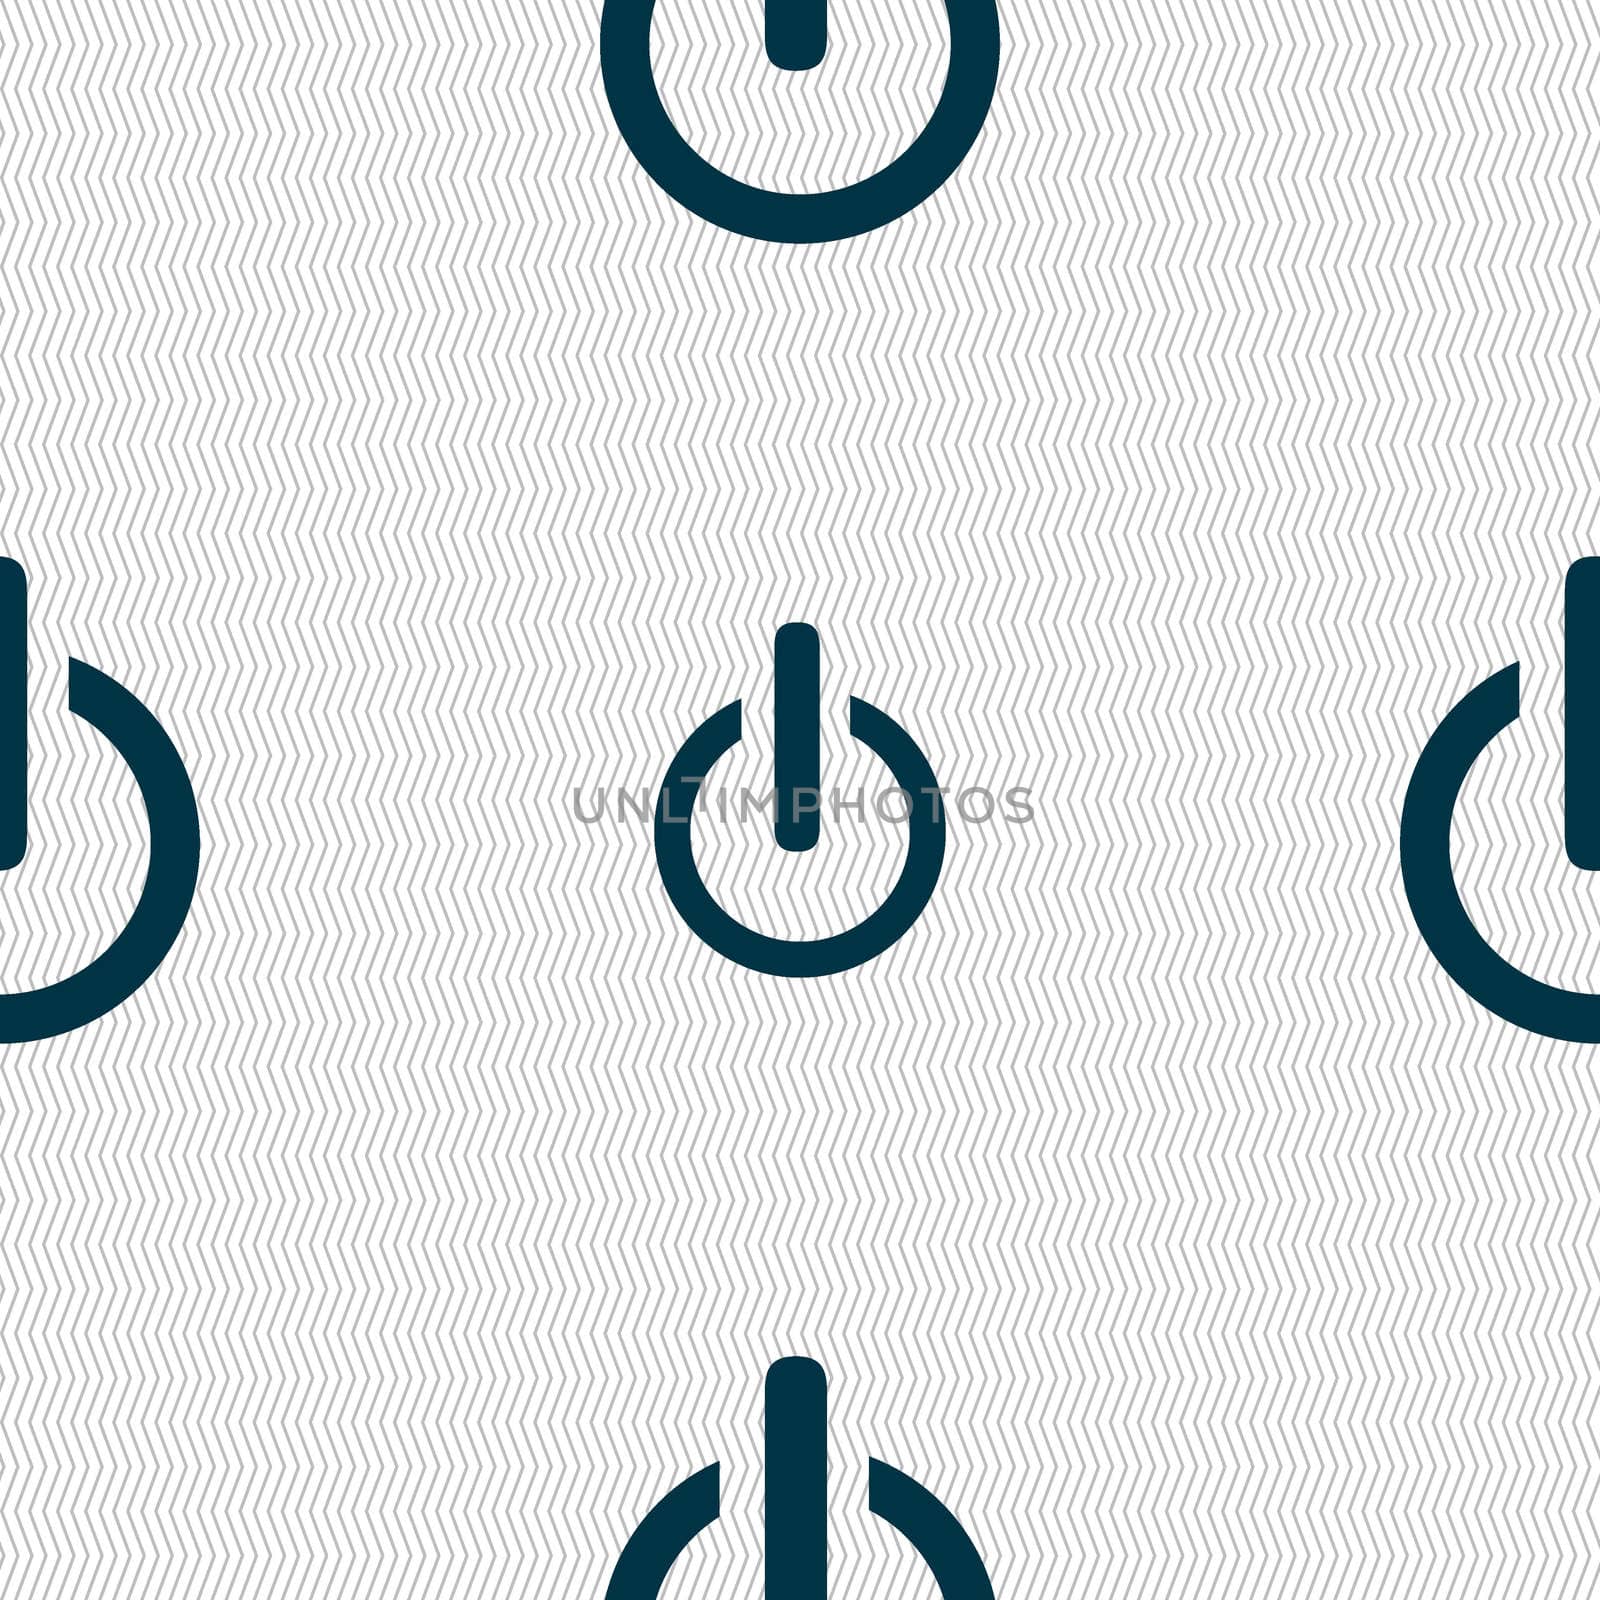 Power sign icon. Switch on symbol. Seamless abstract background with geometric shapes. illustration